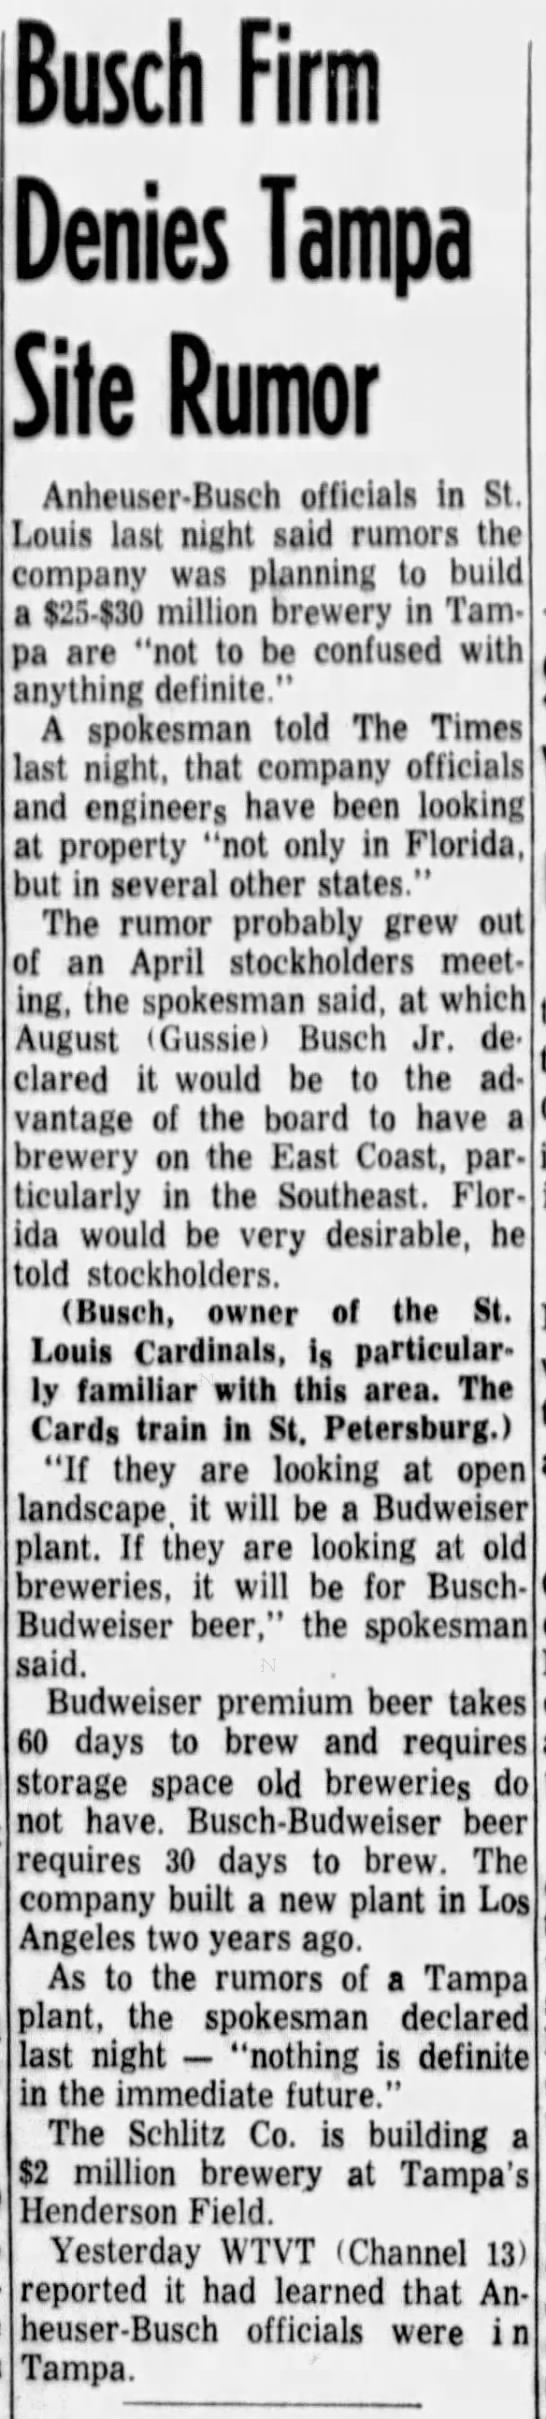 Rumors of possible Anheuser-Busch Brewers in Tampa, June 1957. - 